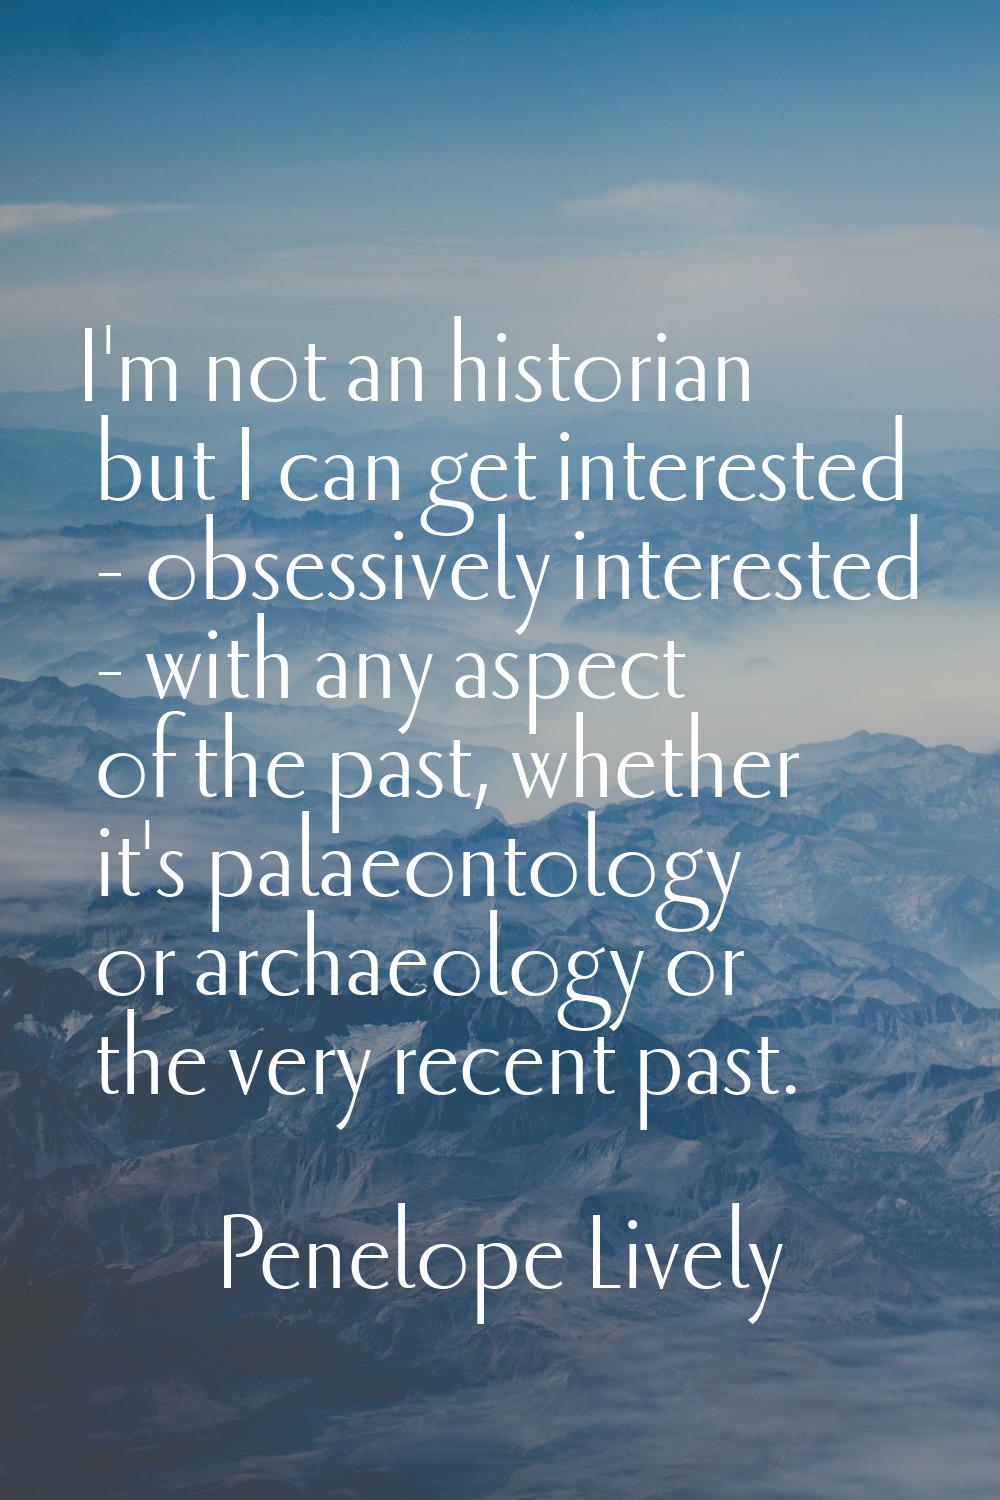 I'm not an historian but I can get interested - obsessively interested - with any aspect of the pas